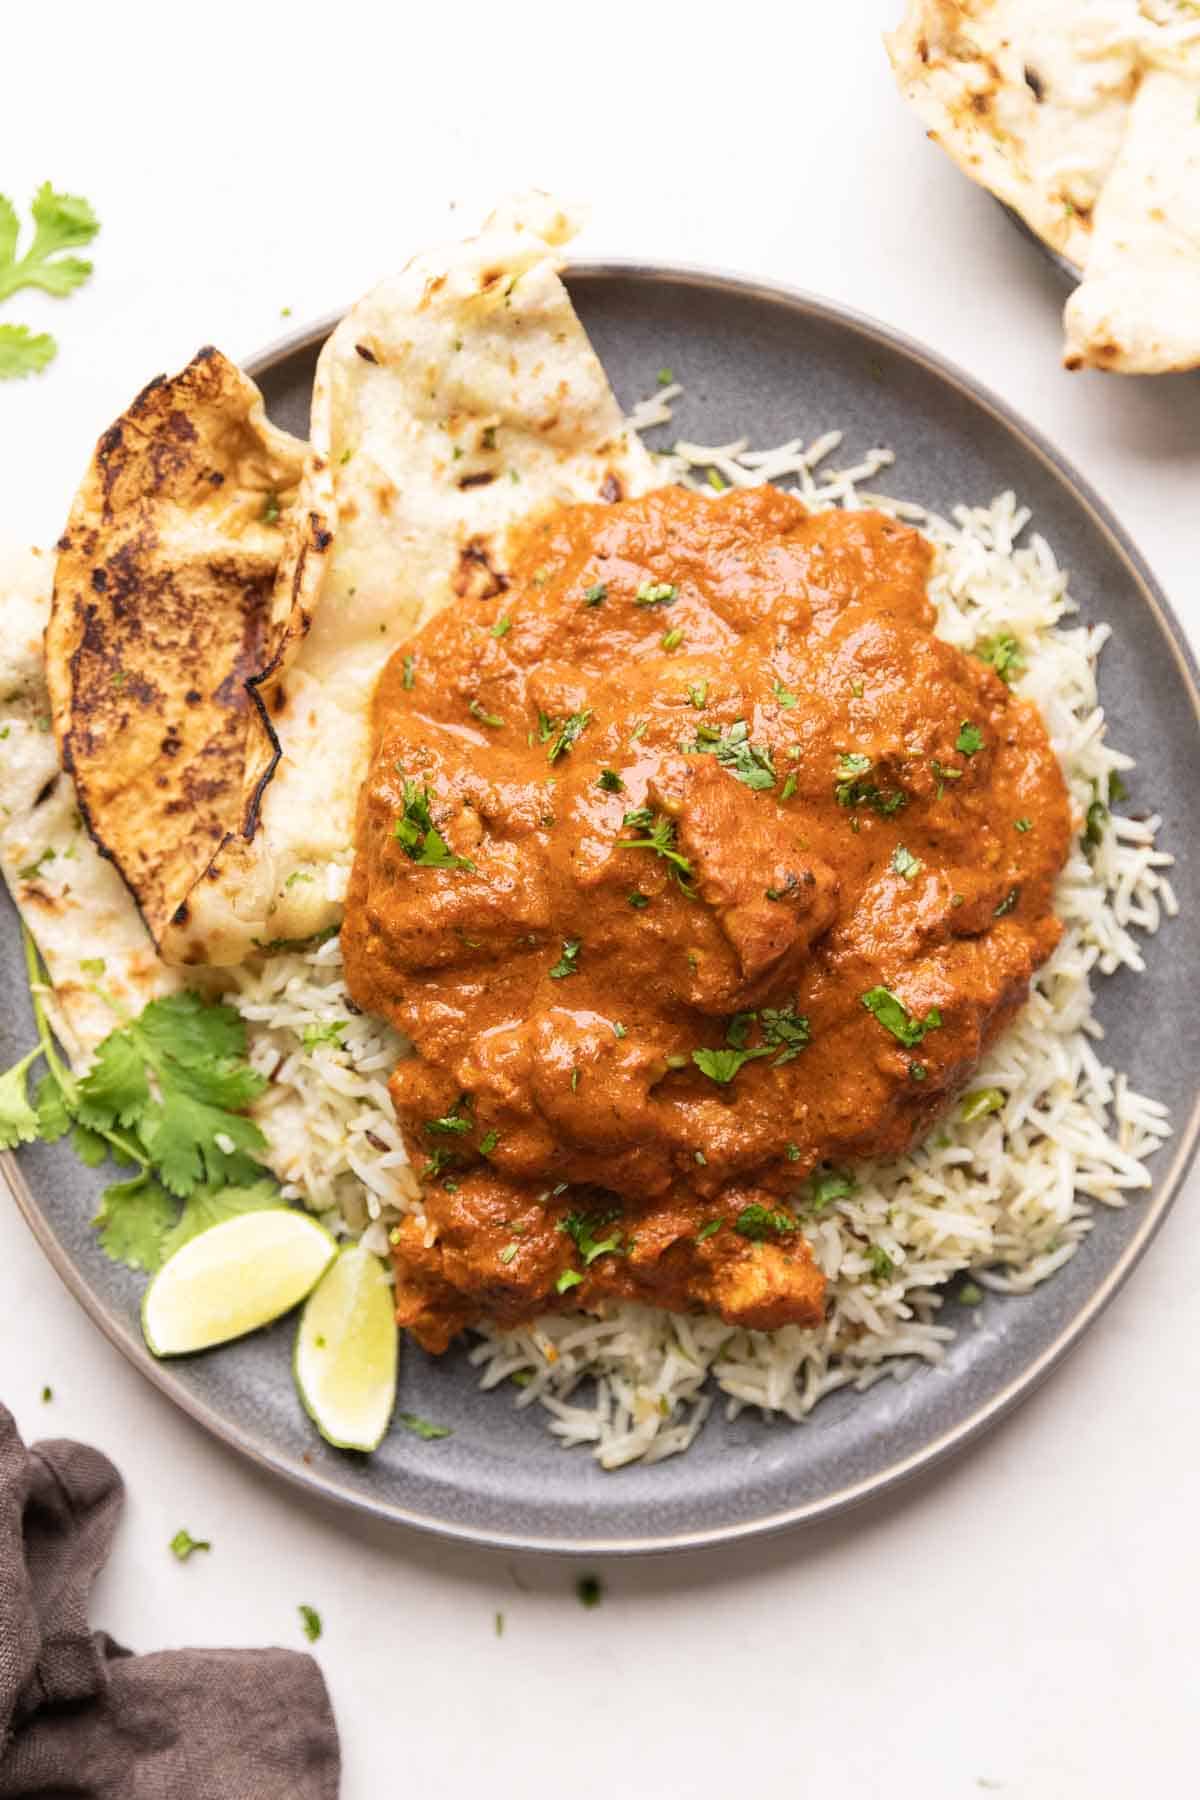 a plate of jeera rice topped with chicken tikka masala with a side of naan